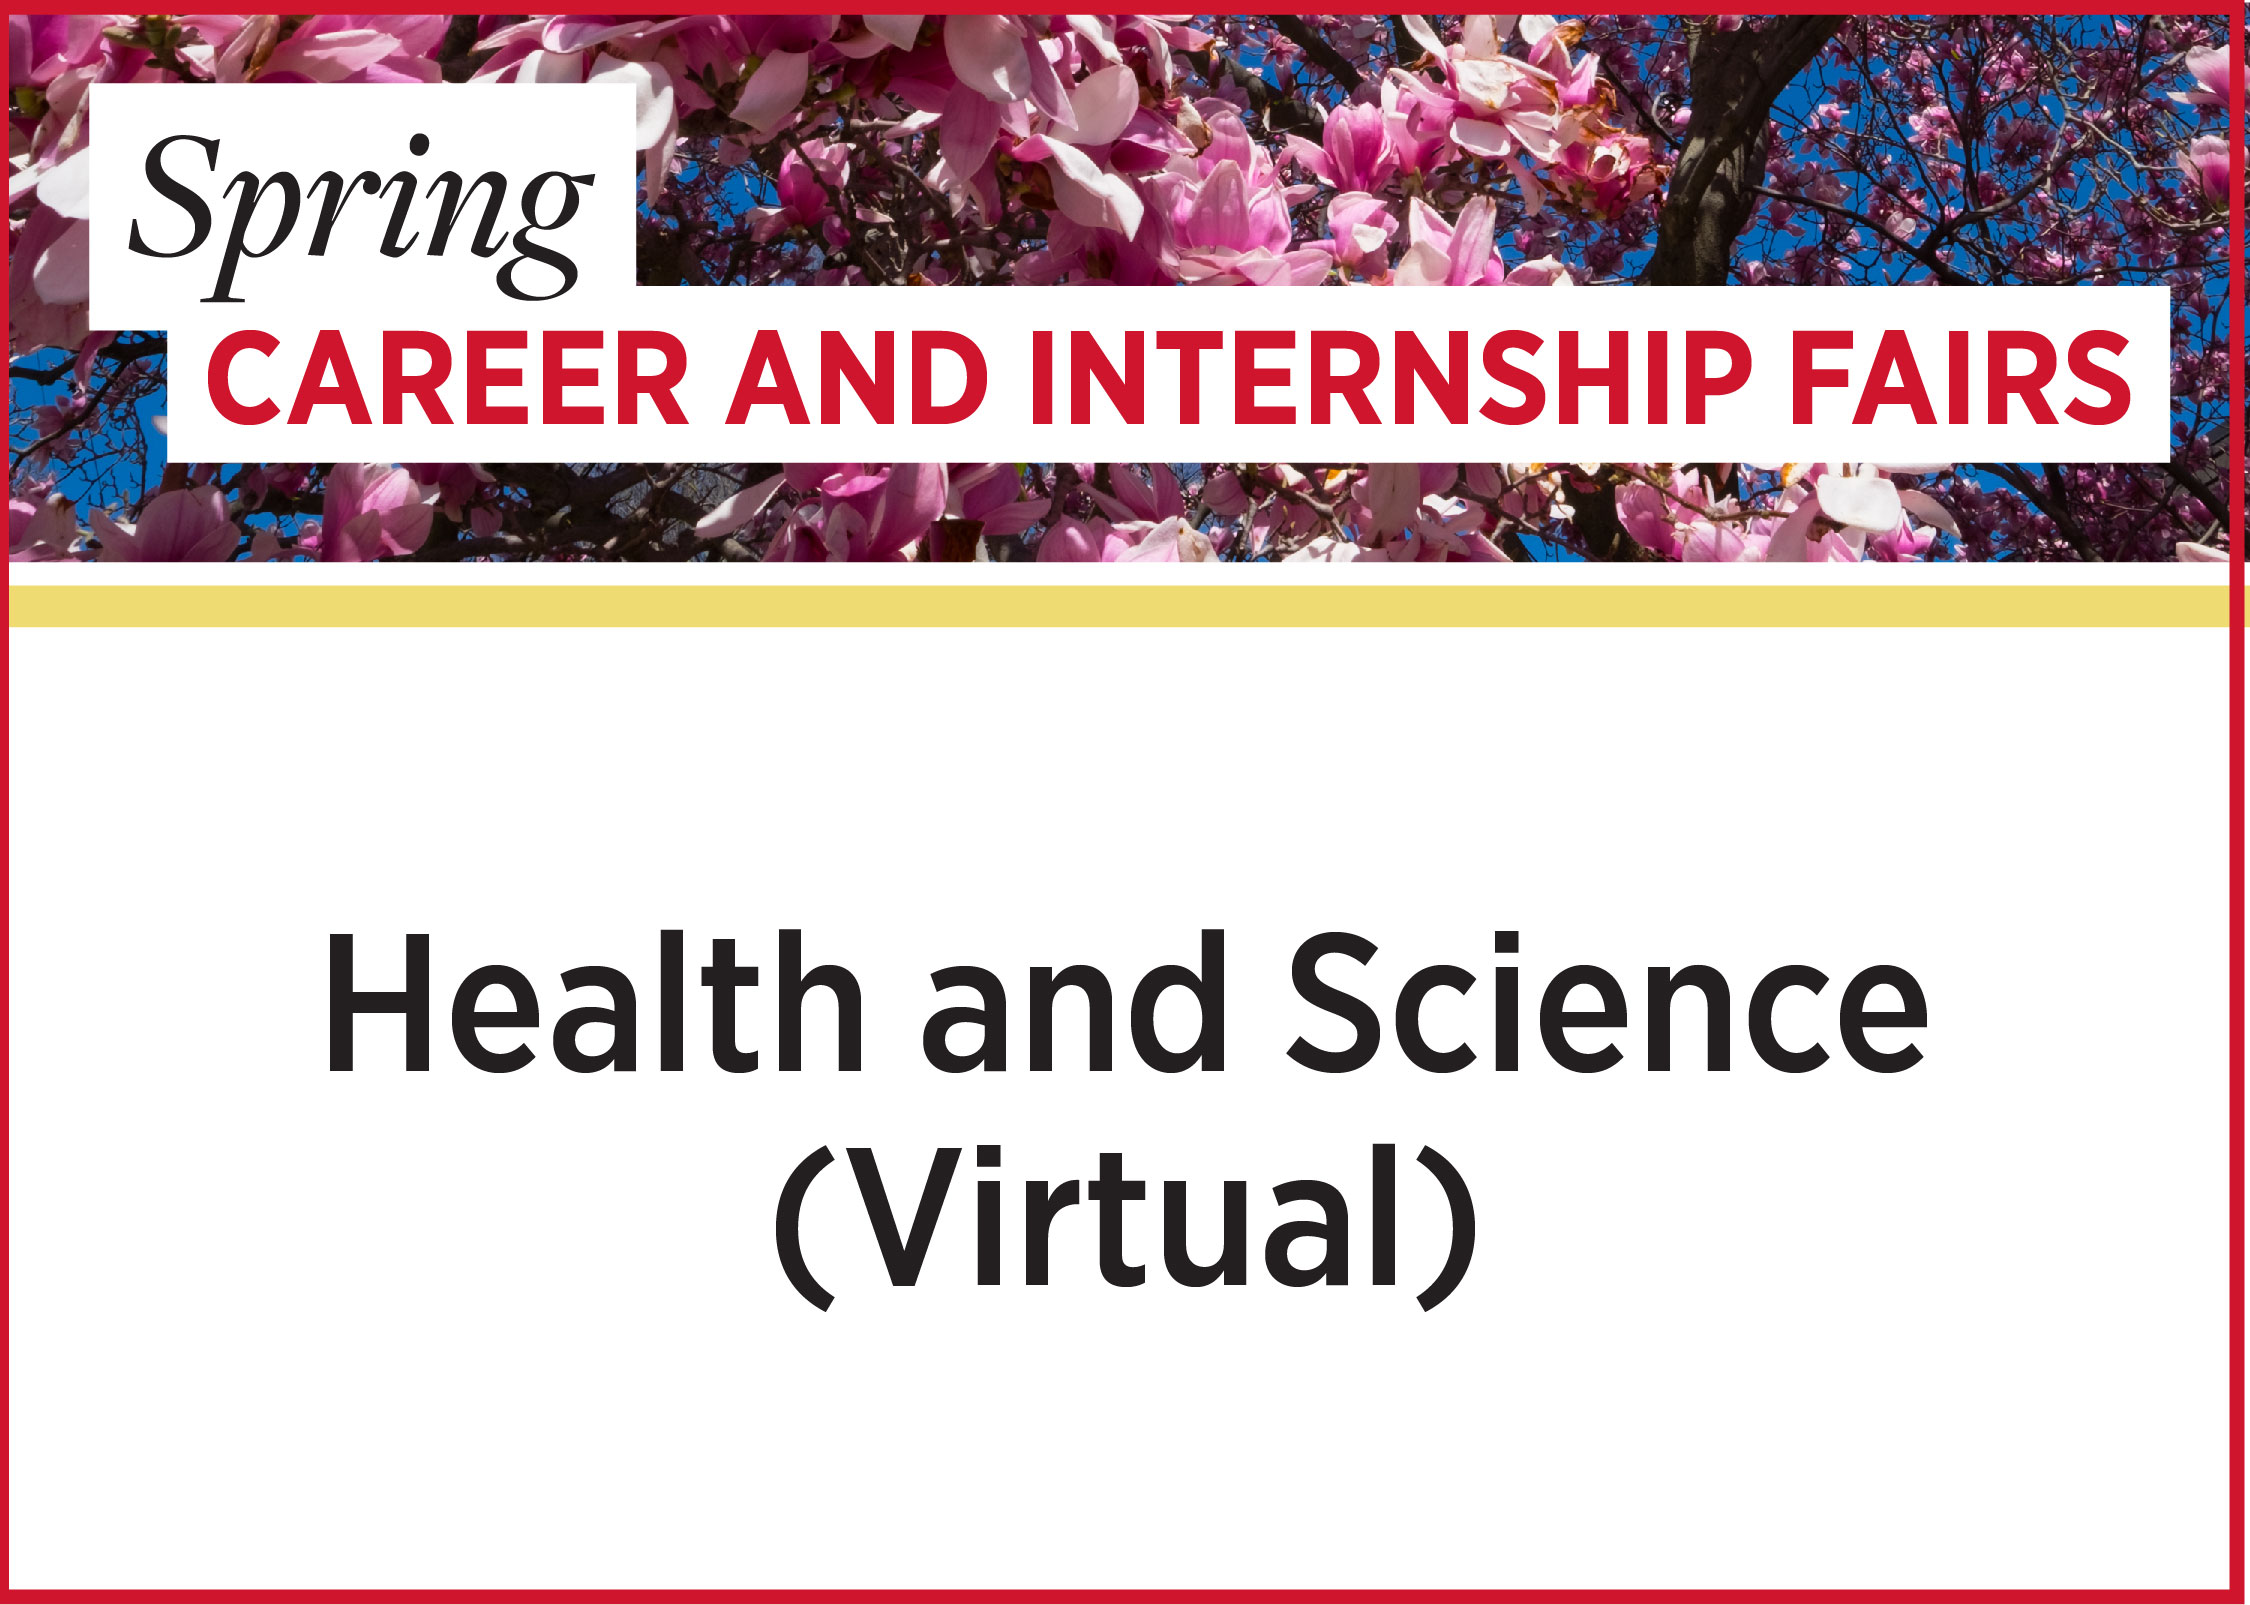 Spring Career and Internship Fairs - Health and Science